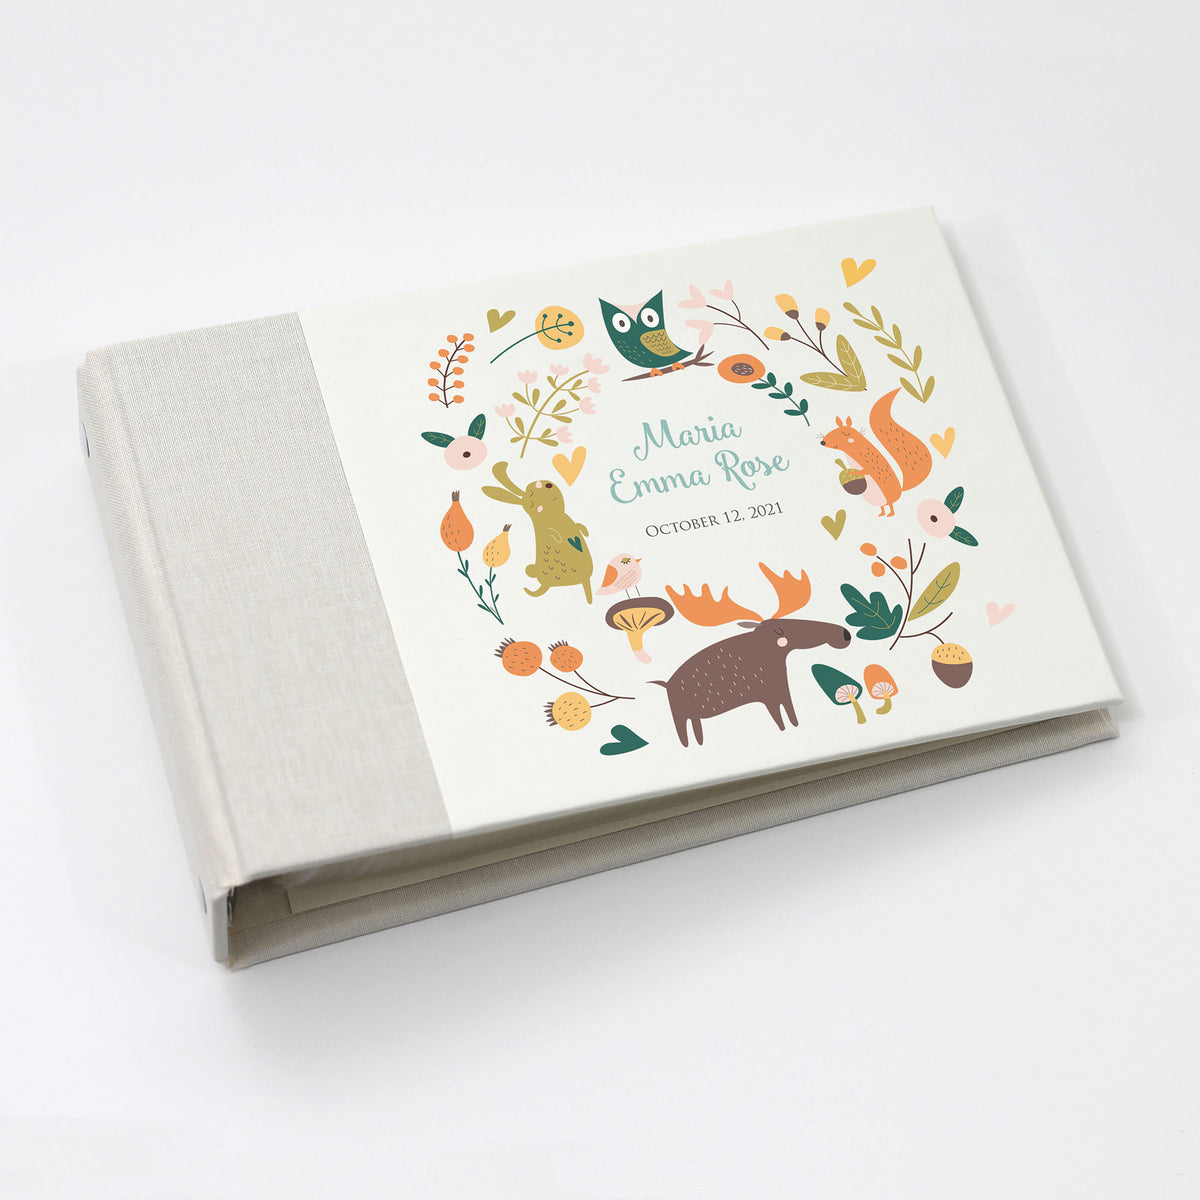 Small Photo Binder | Printed Cover: Forest Friends | 4x6 Photos | Available Personalized